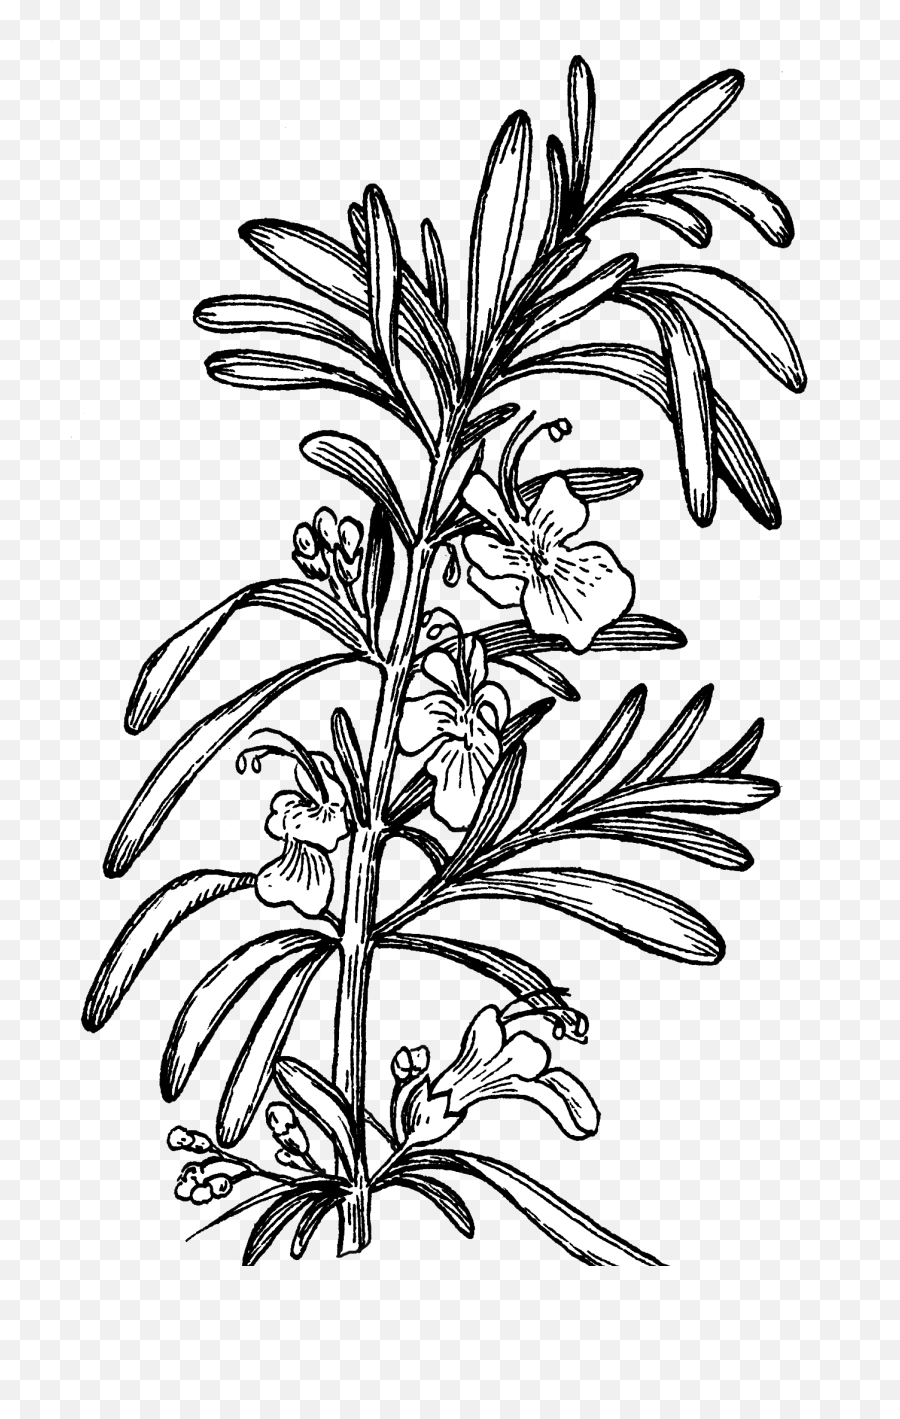 Filerosemary Plant Psfpng - Wikimedia Commons Transparent Rosemary Drawing,Plants Png